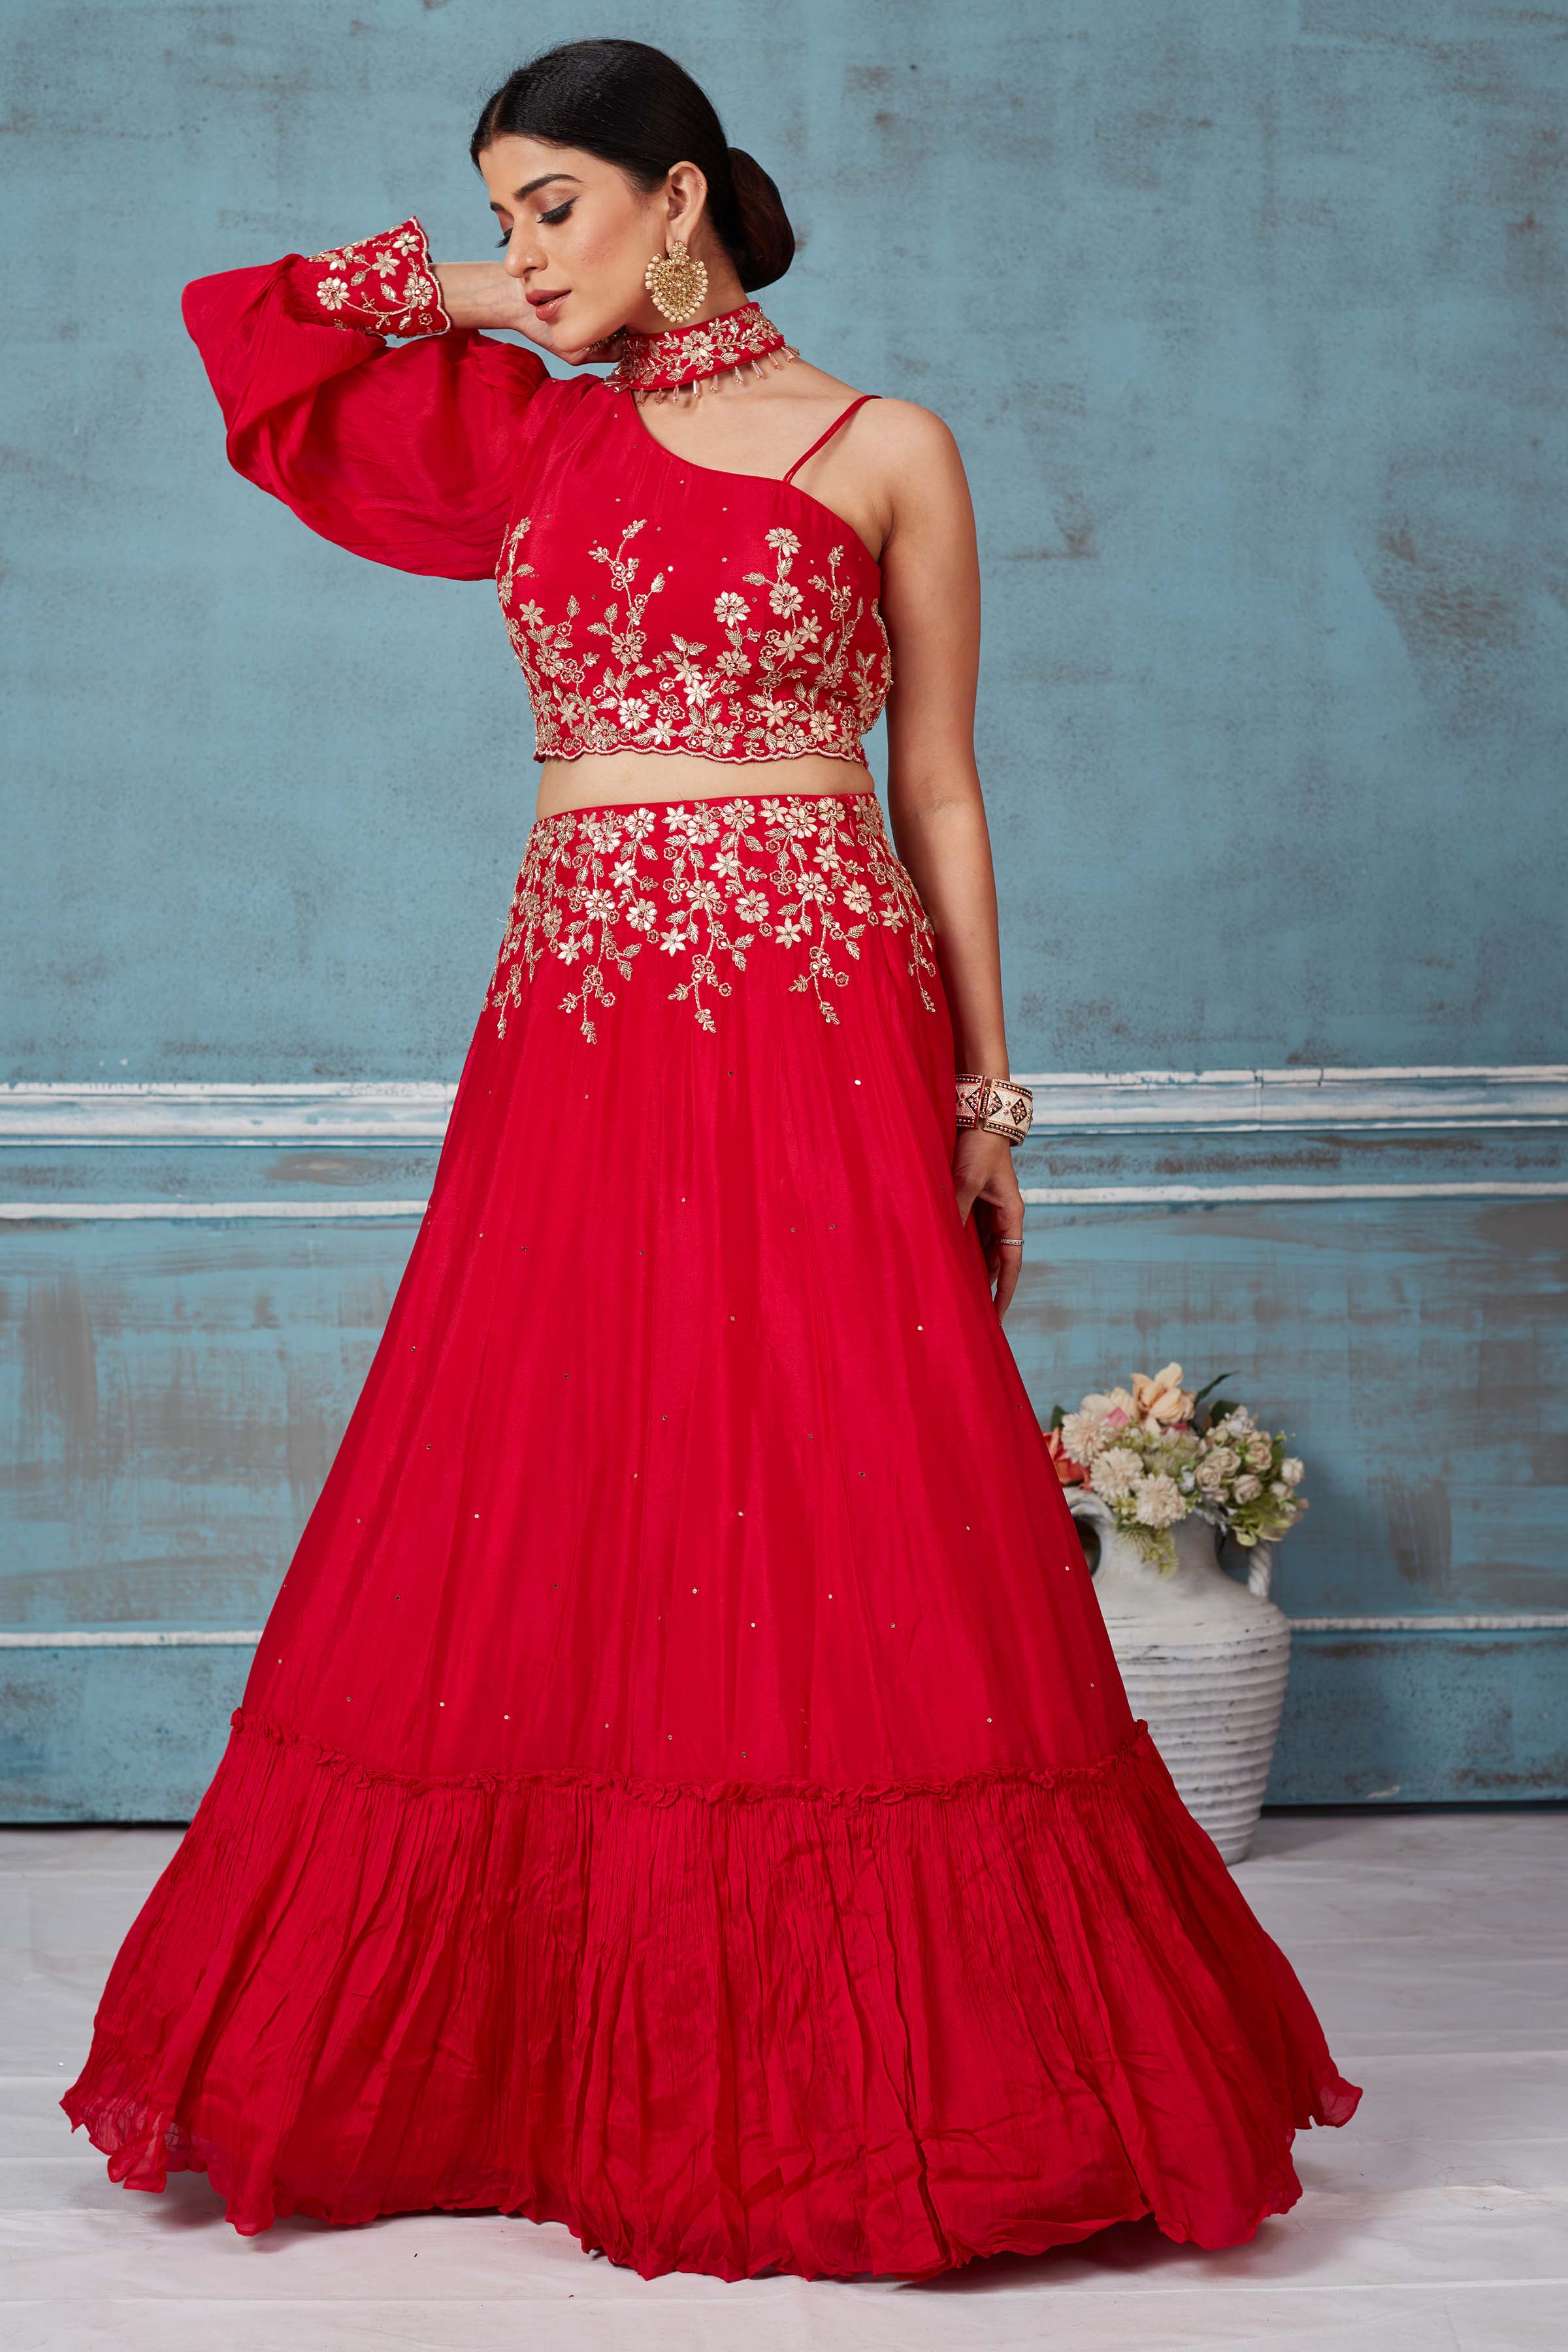 Buy red georgette embroidered contemporary skirt set online in USA. Look royal on special occasions in exquisite designer lehengas, pure silk sarees, handloom sarees, Bollywood sarees, Anarkali suits, Banarasi sarees, organza sarees from Pure Elegance Indian saree store in USA.-skirt set